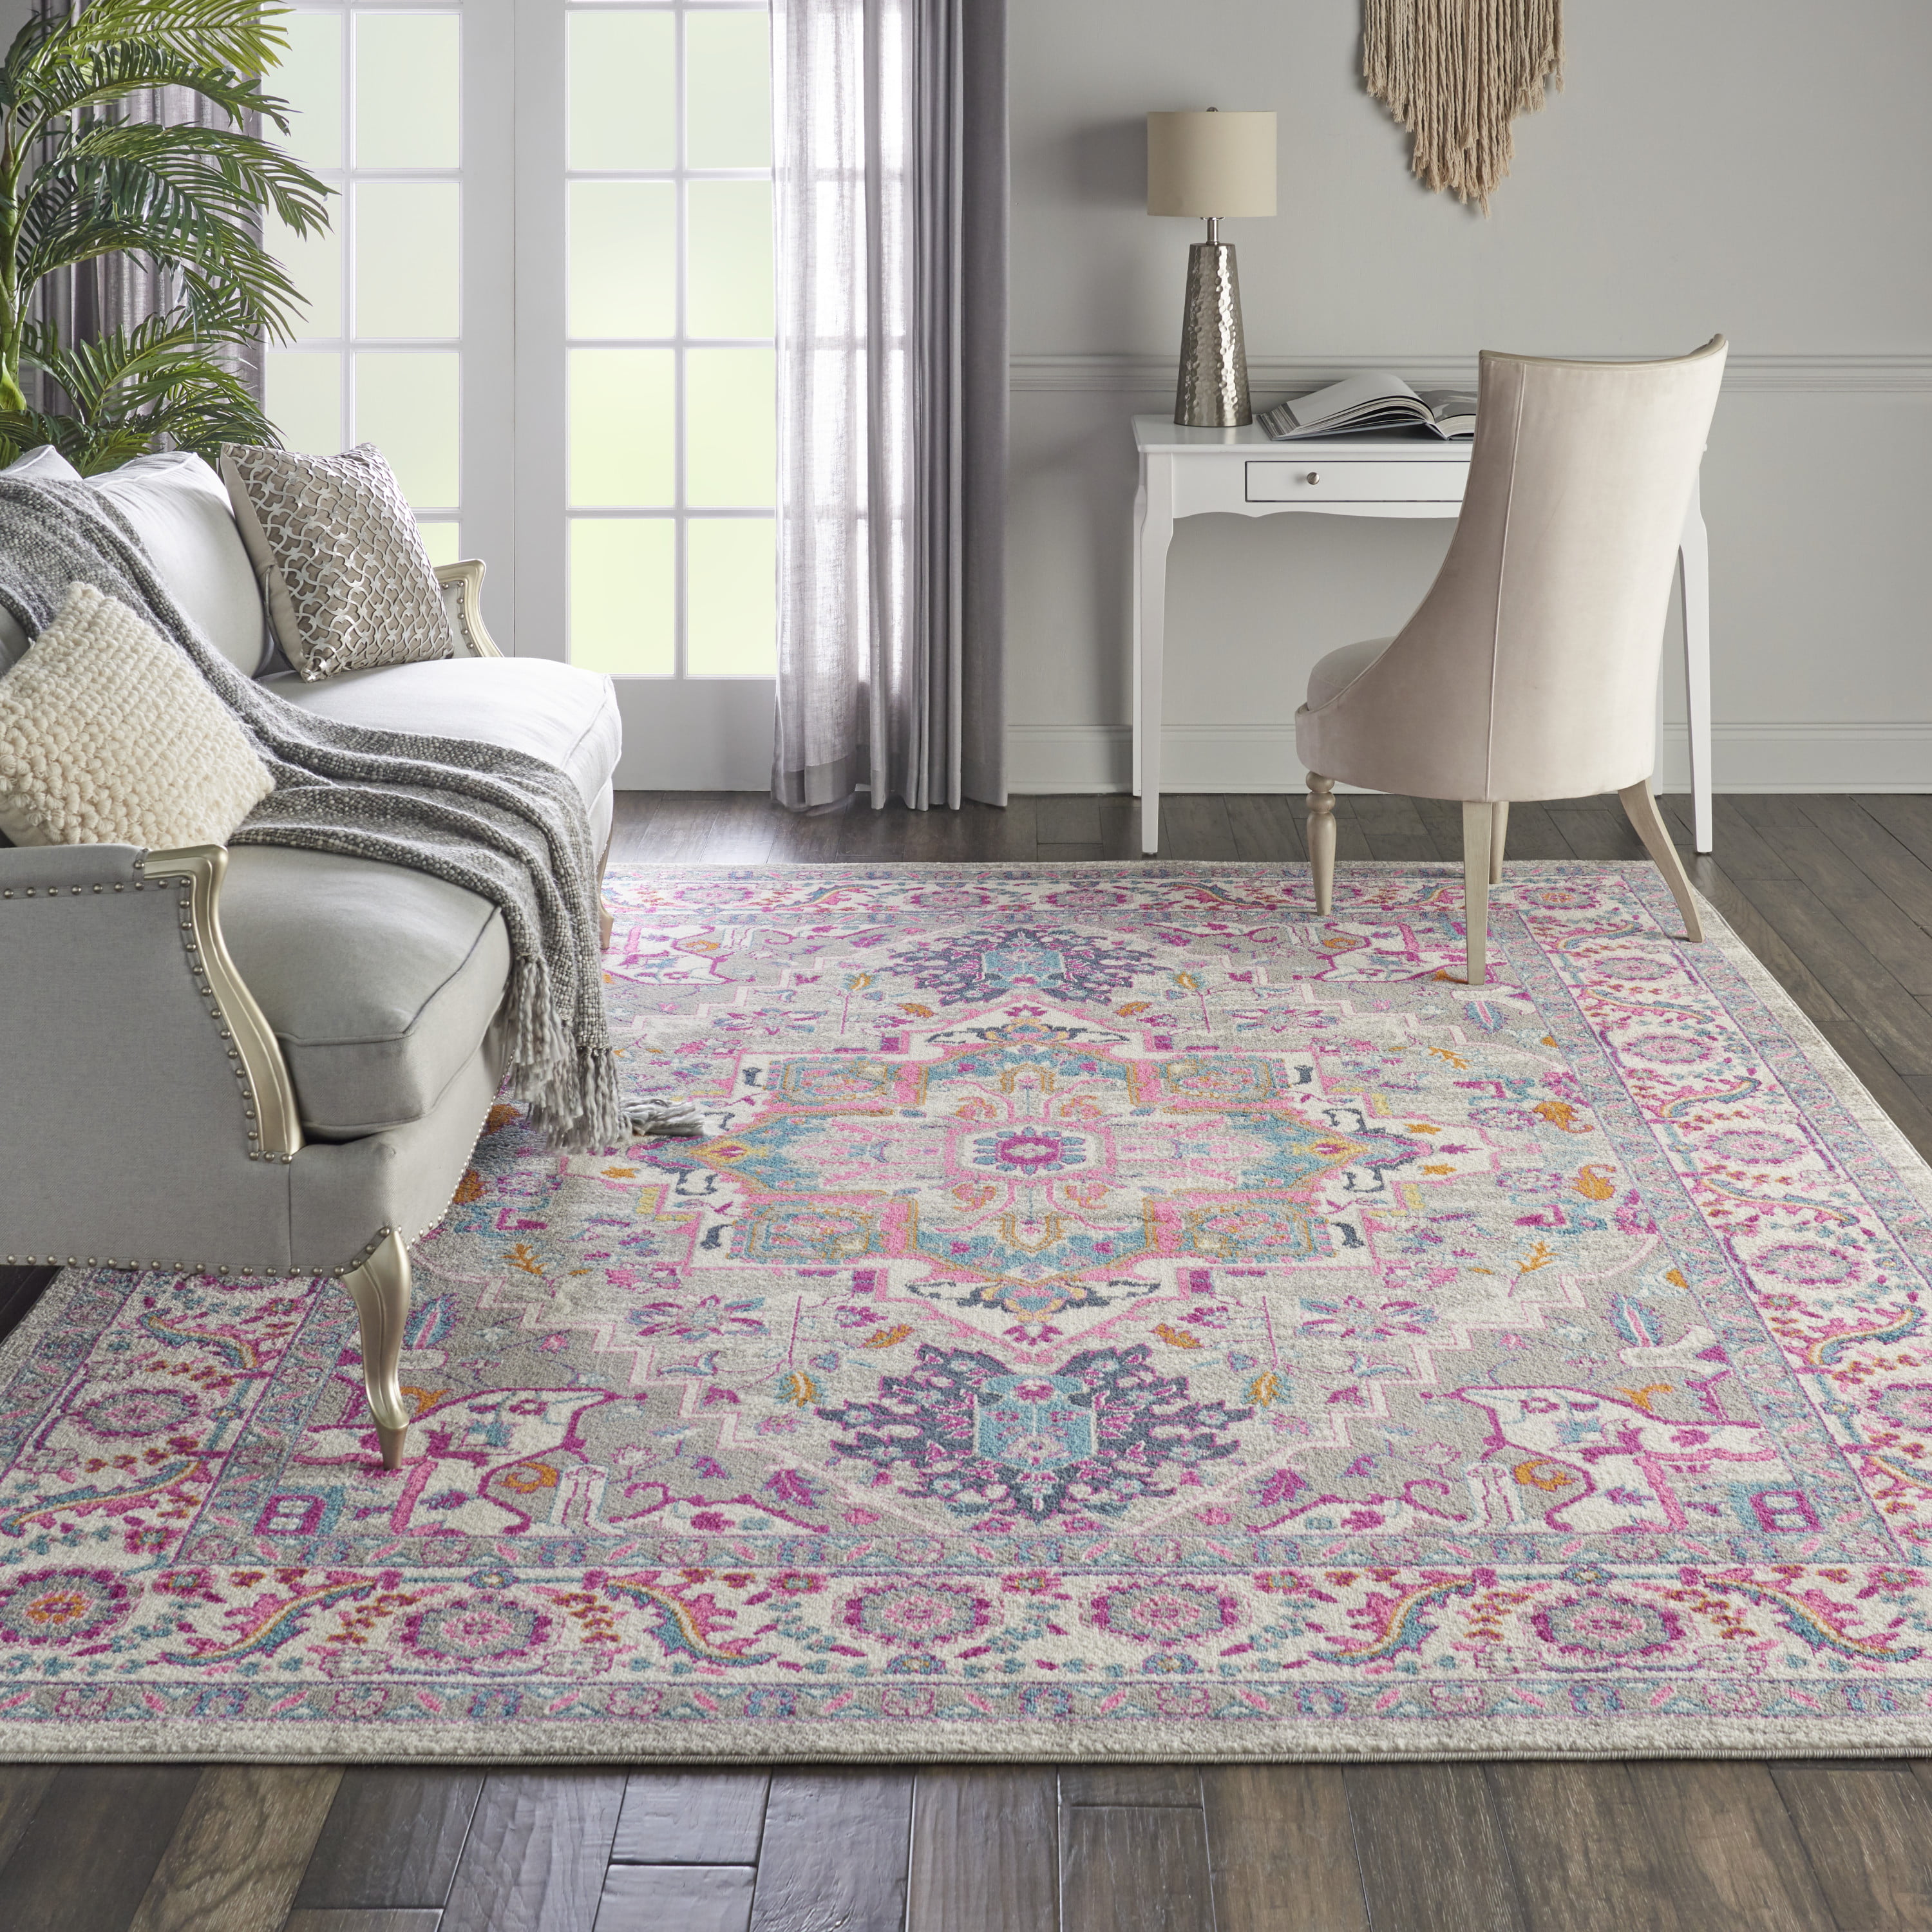 2'x 8', Nourison PSN20 Passion Persian Colorful Light Grey/Pink Area Rug Runner 2'2 X 7'6 